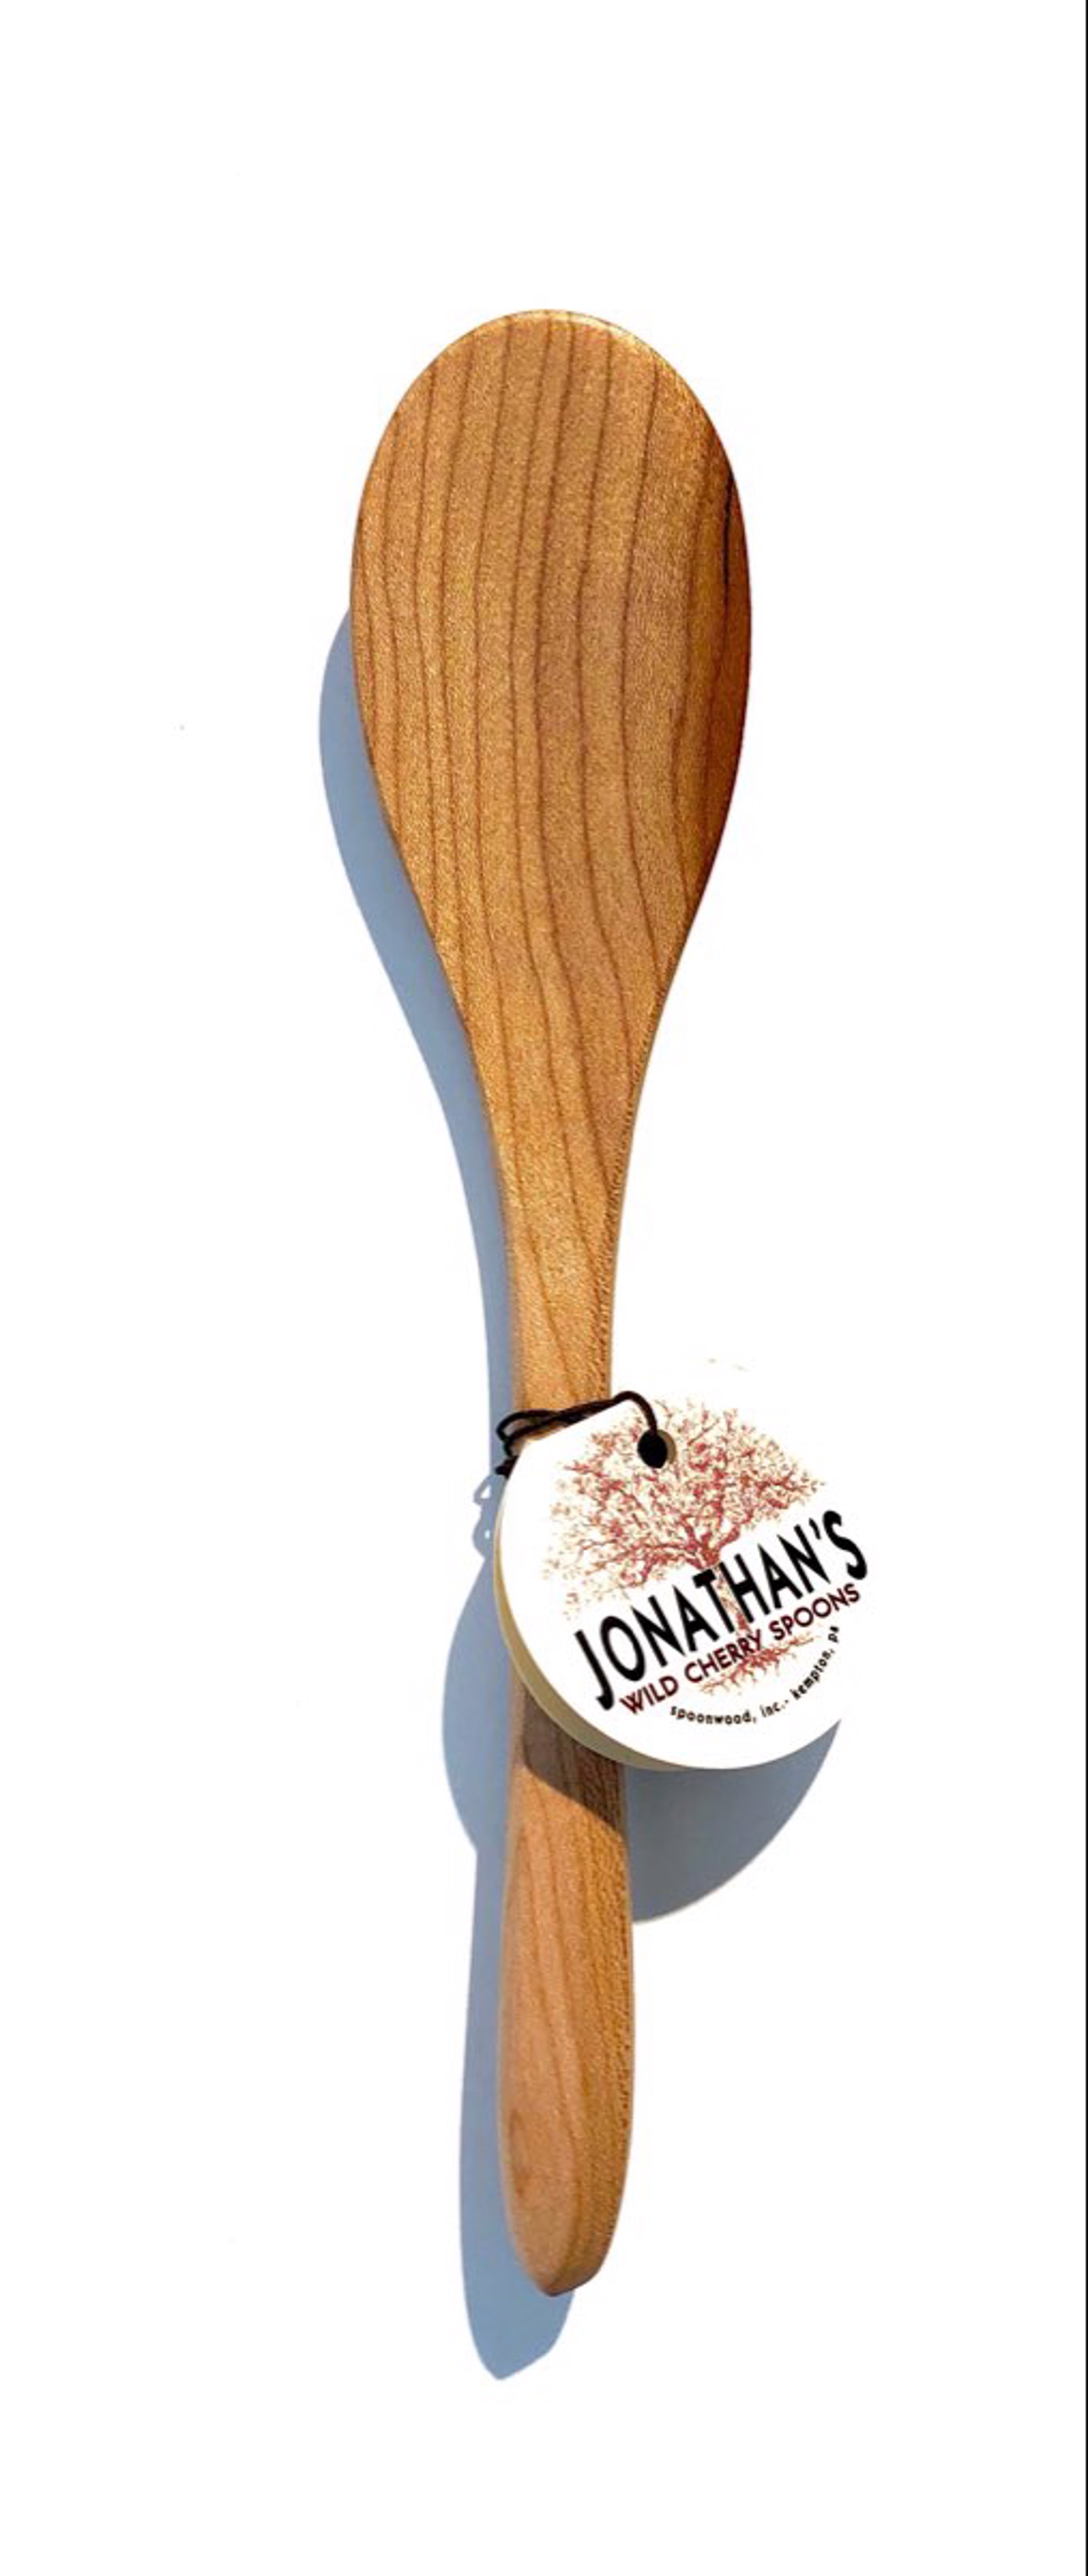 Jelly Spoon by Jonathan's Spoons